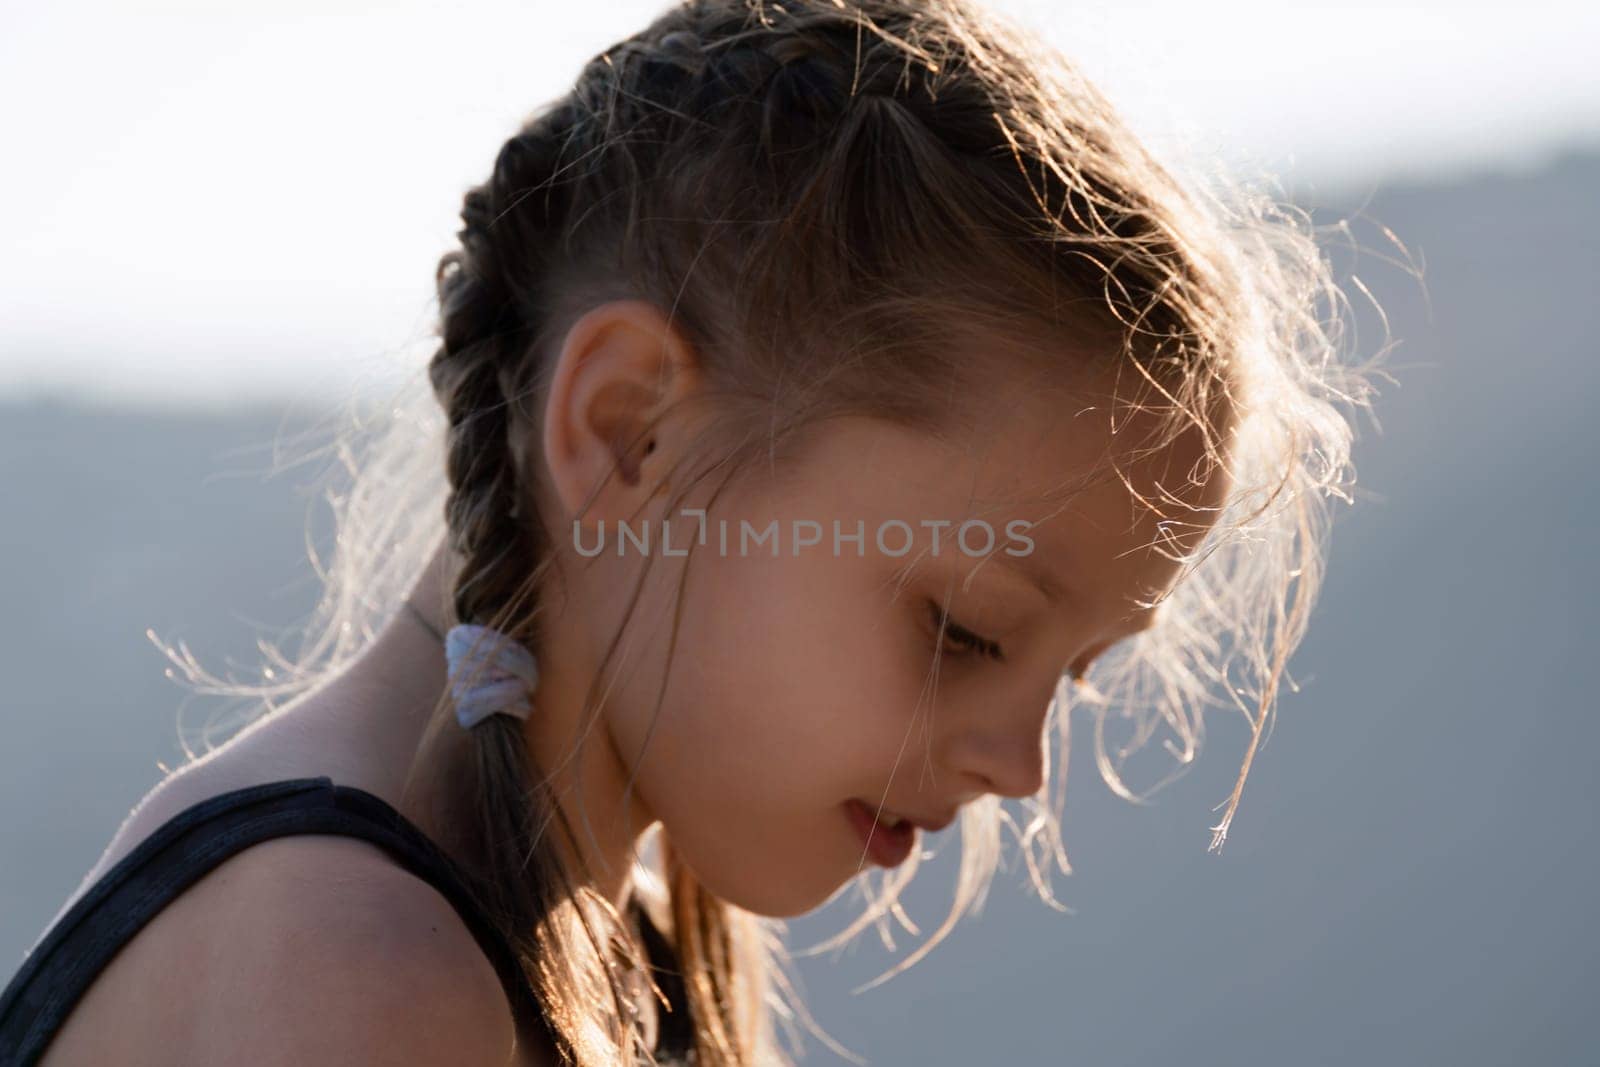 A young girl with braided hair is looking at the camera. She has a red lip and her hair is wet